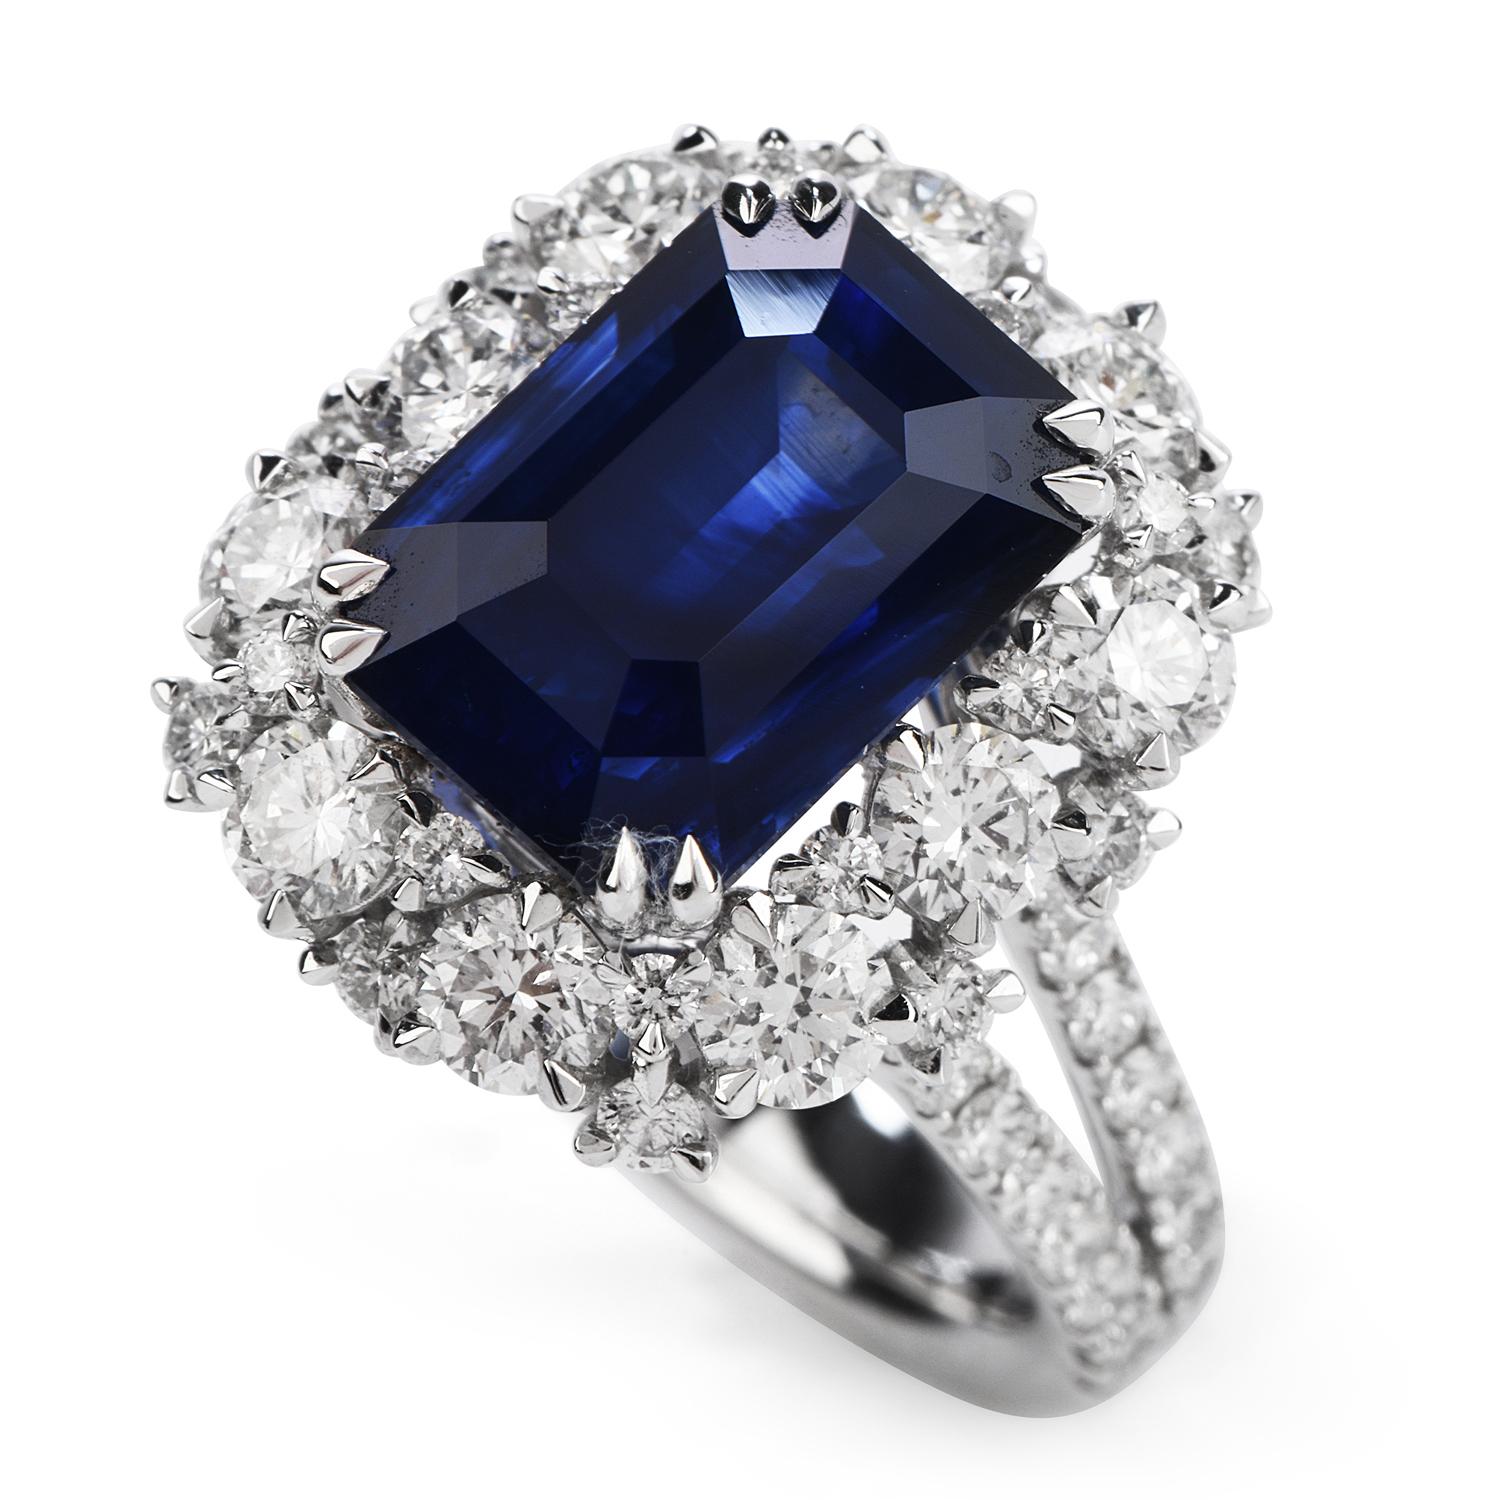 Vivid Blue Sapphire & Sparkly Diamond Cocktail Engagement ring, 

Crafted in solid 18K white gold, the center is adorned by a GRS certified Blue Royal Ceylan Genuine Sapphire, octagonal shaped, prong cut, weighing in a total of 6.80